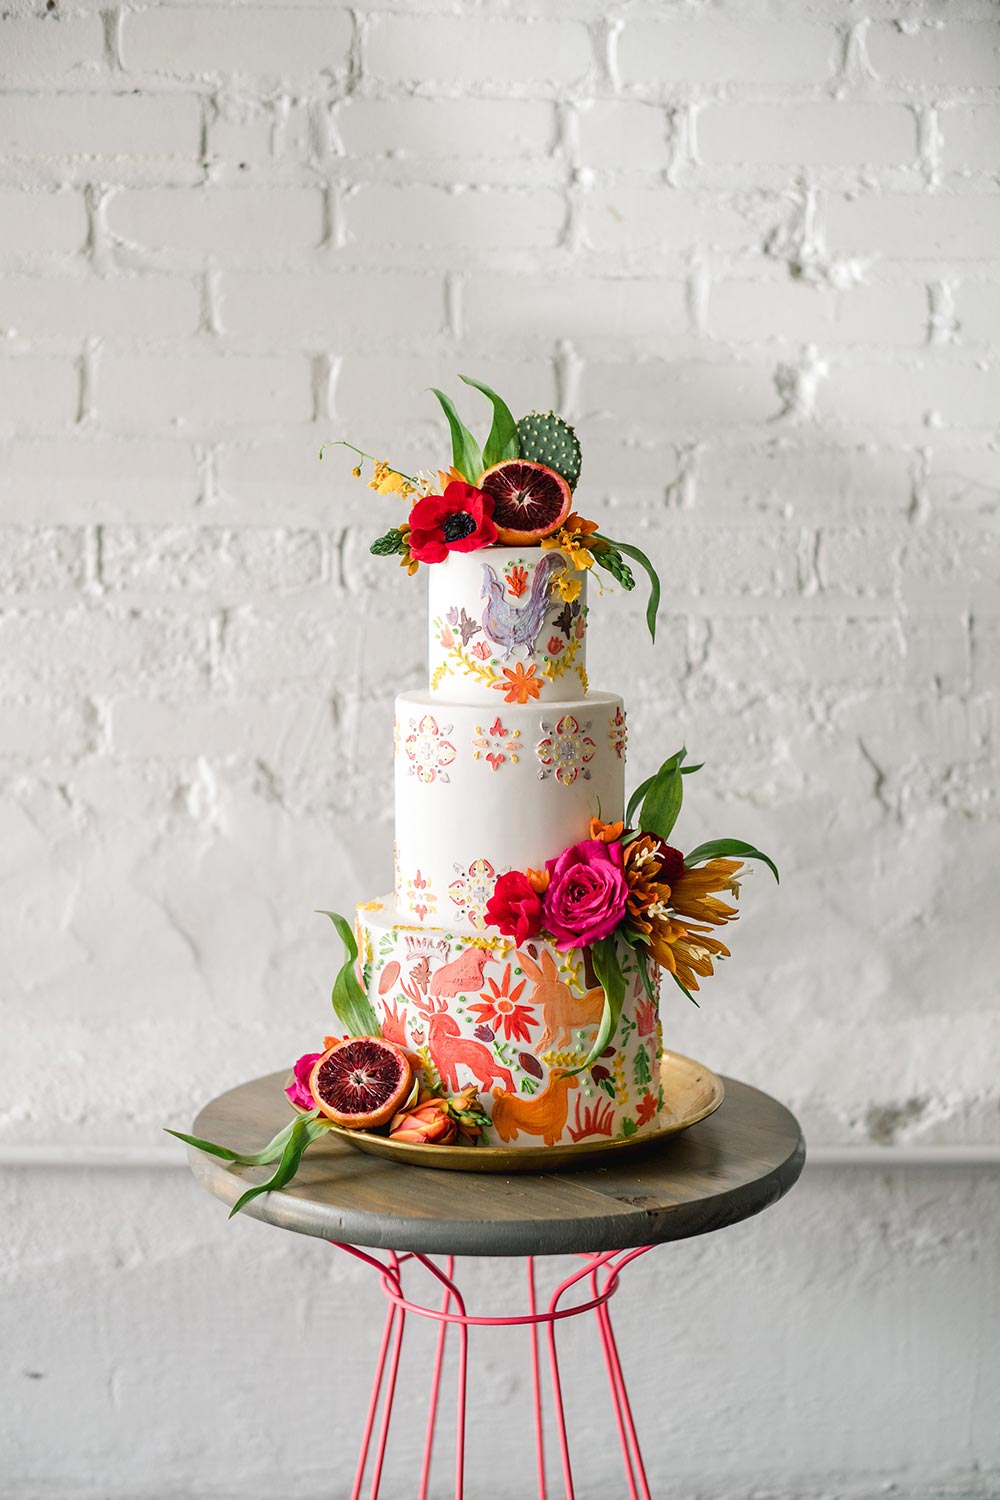 intricate Cinco de Mayo cake with colorful animal motifs, tropical flowers and pomegranate accents